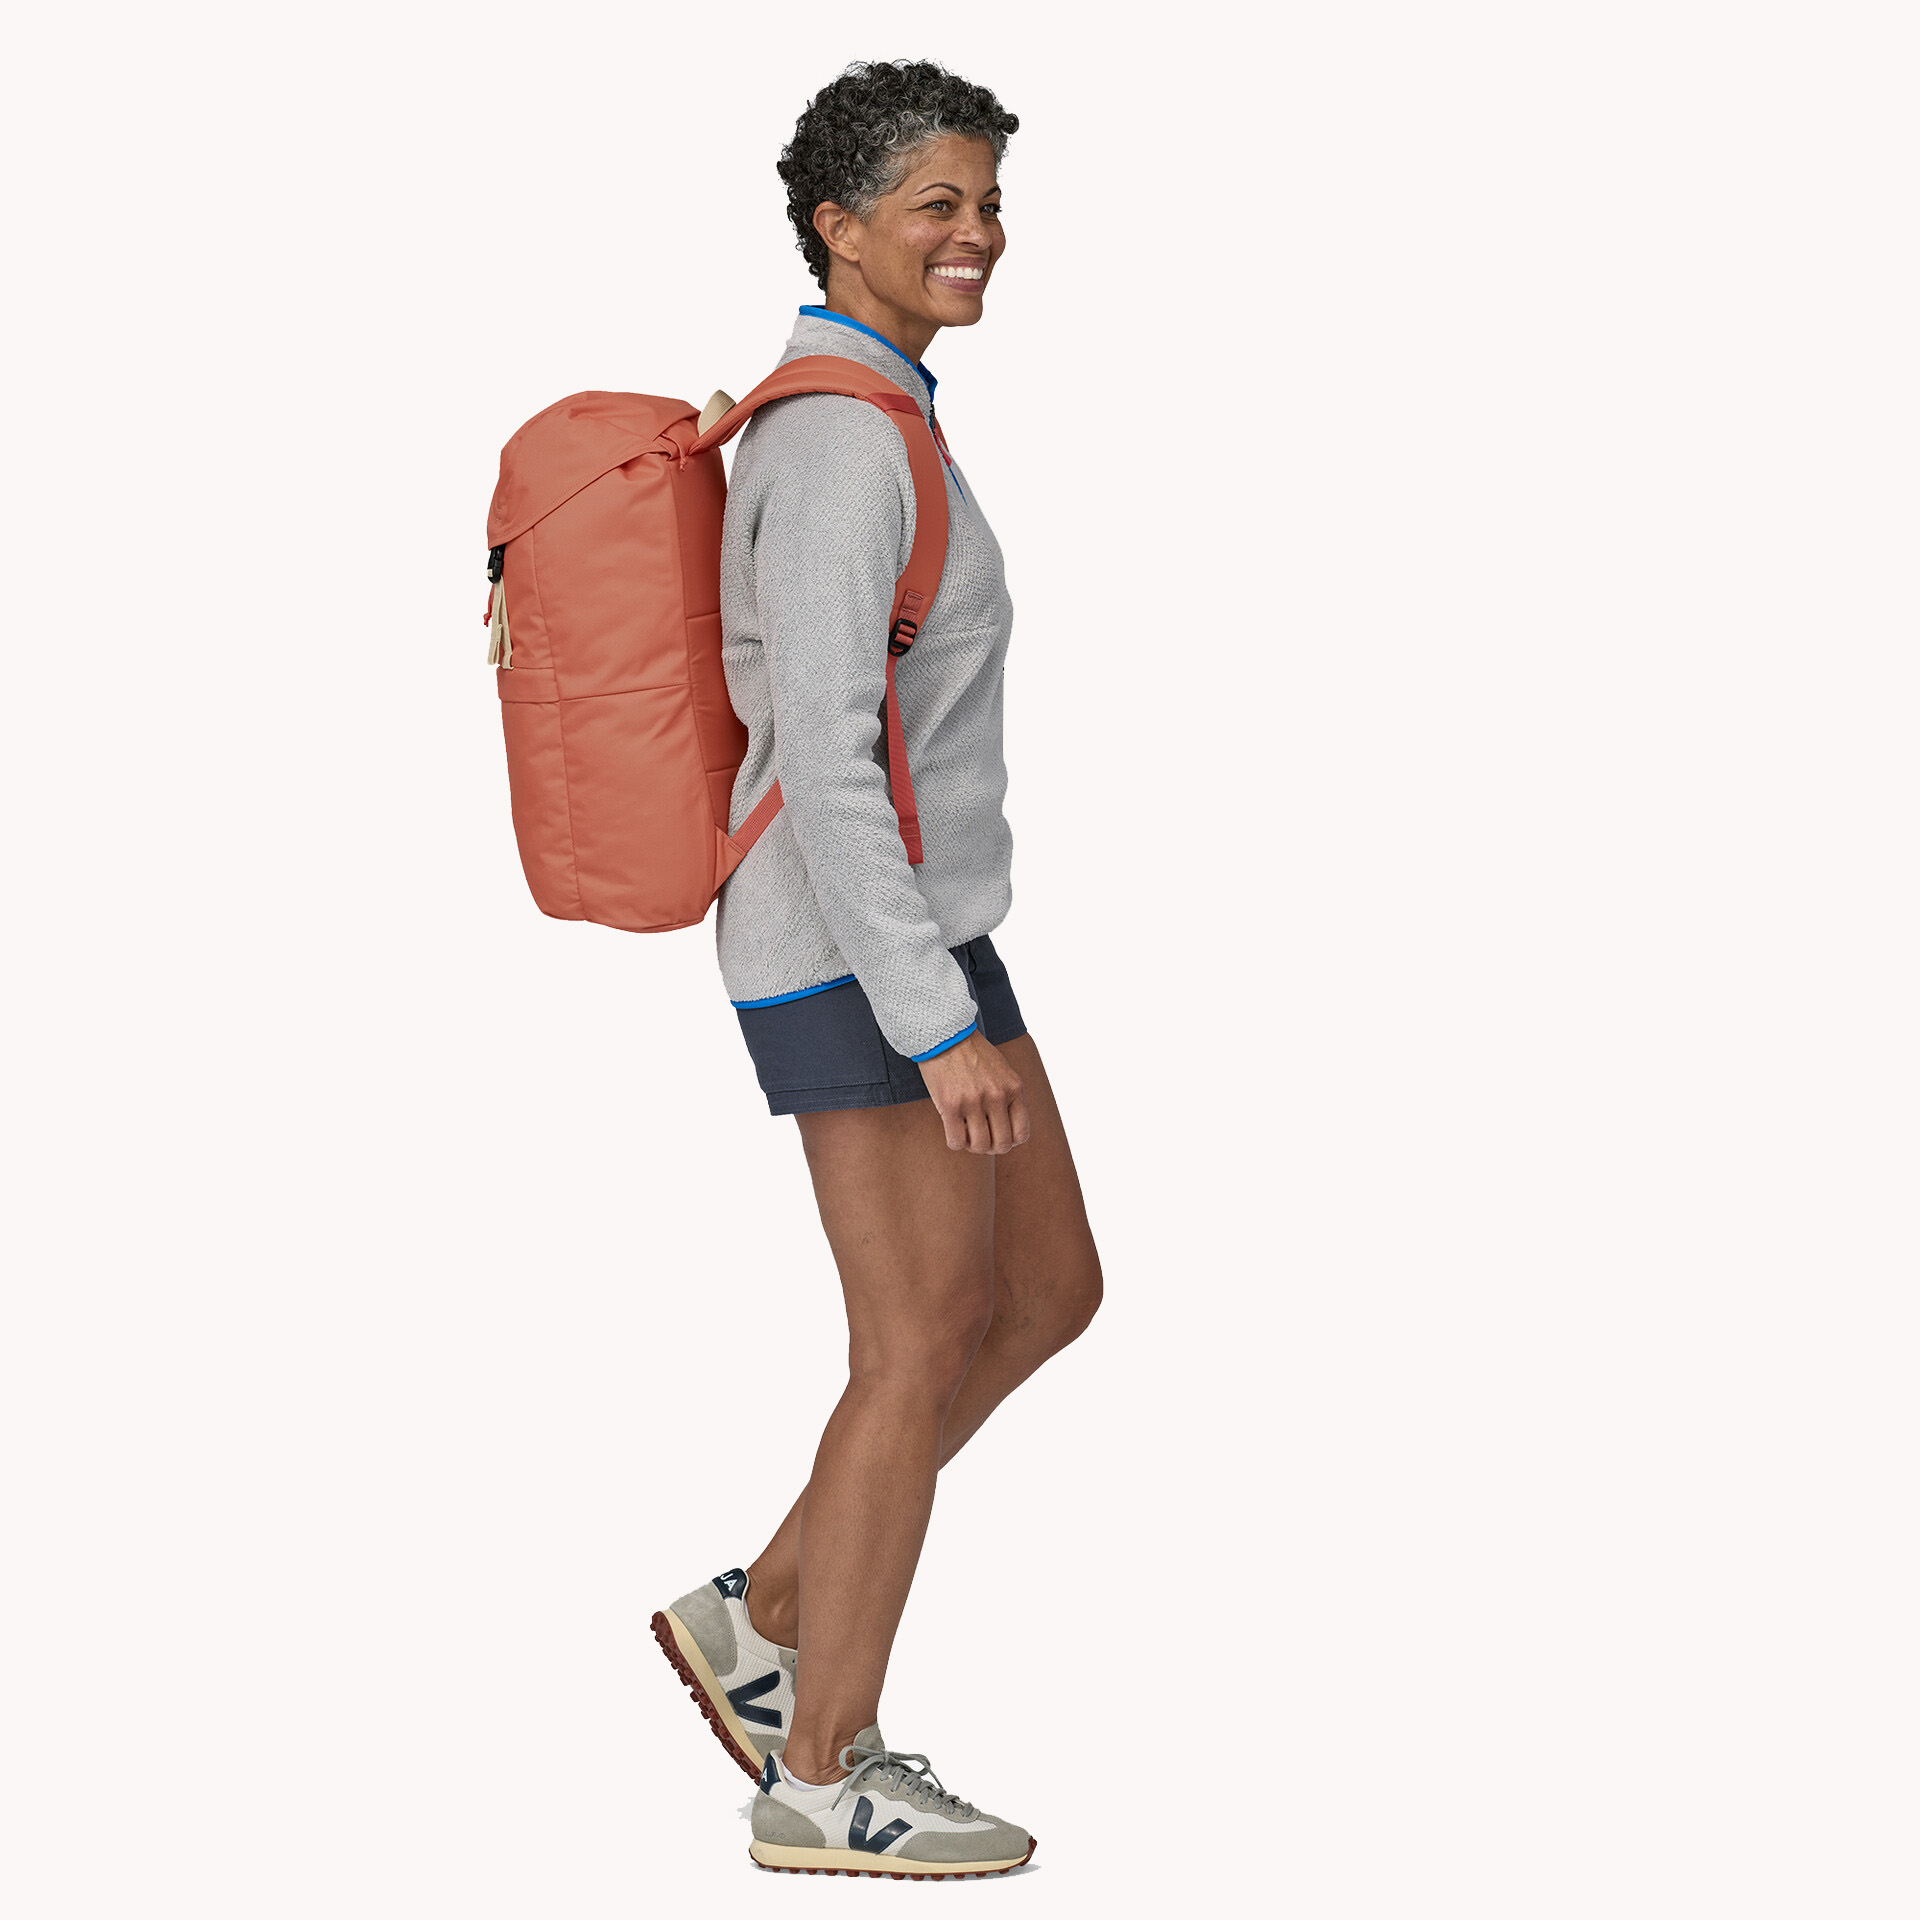 A model wearing a Patagonia backpack.